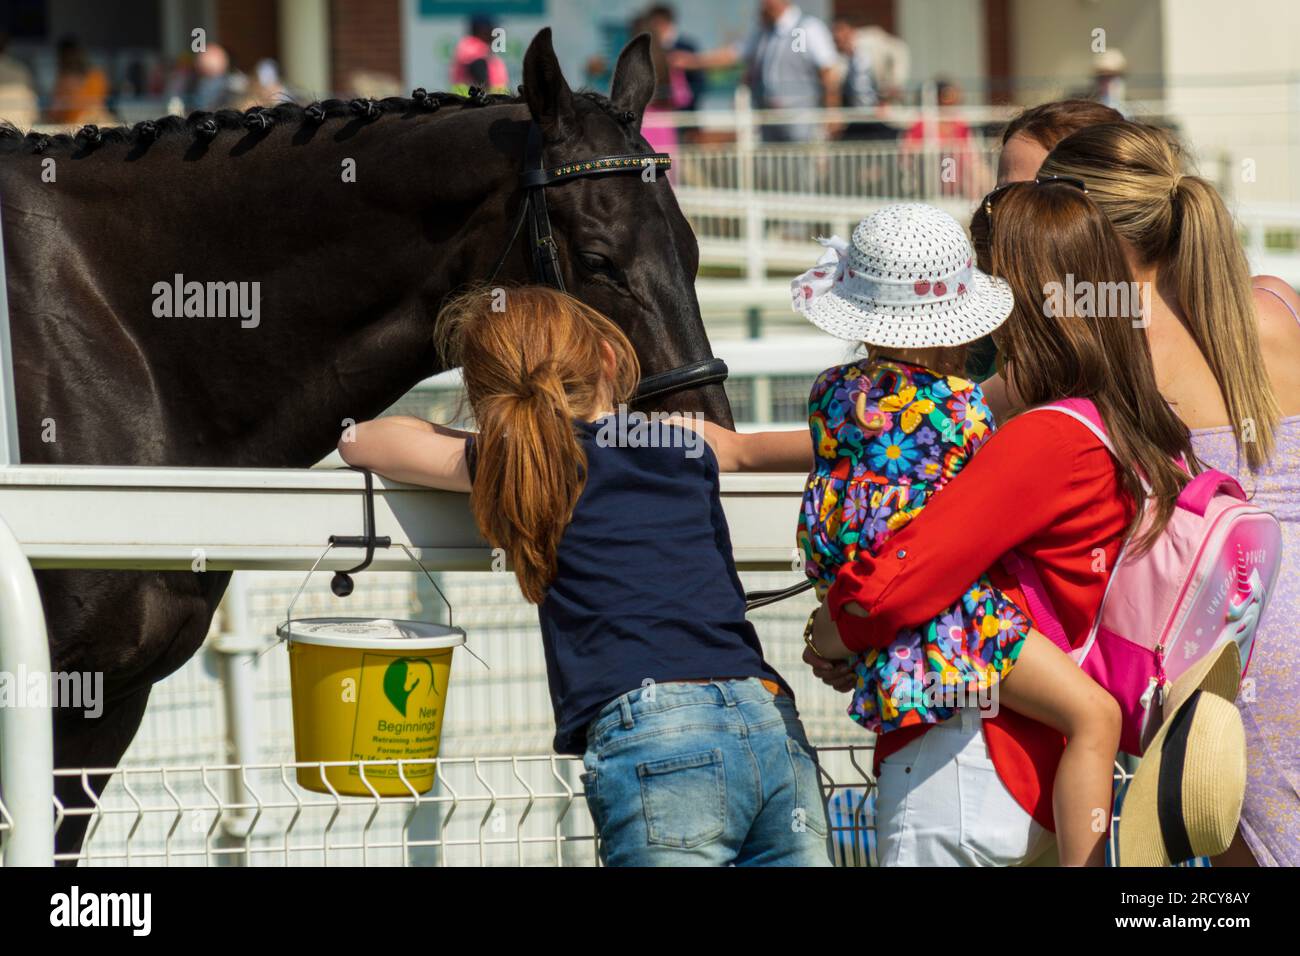 York Races, race day is a traditional horse racing event full of friends and families. Children love to pet, watch and learn about the race horses. Stock Photo